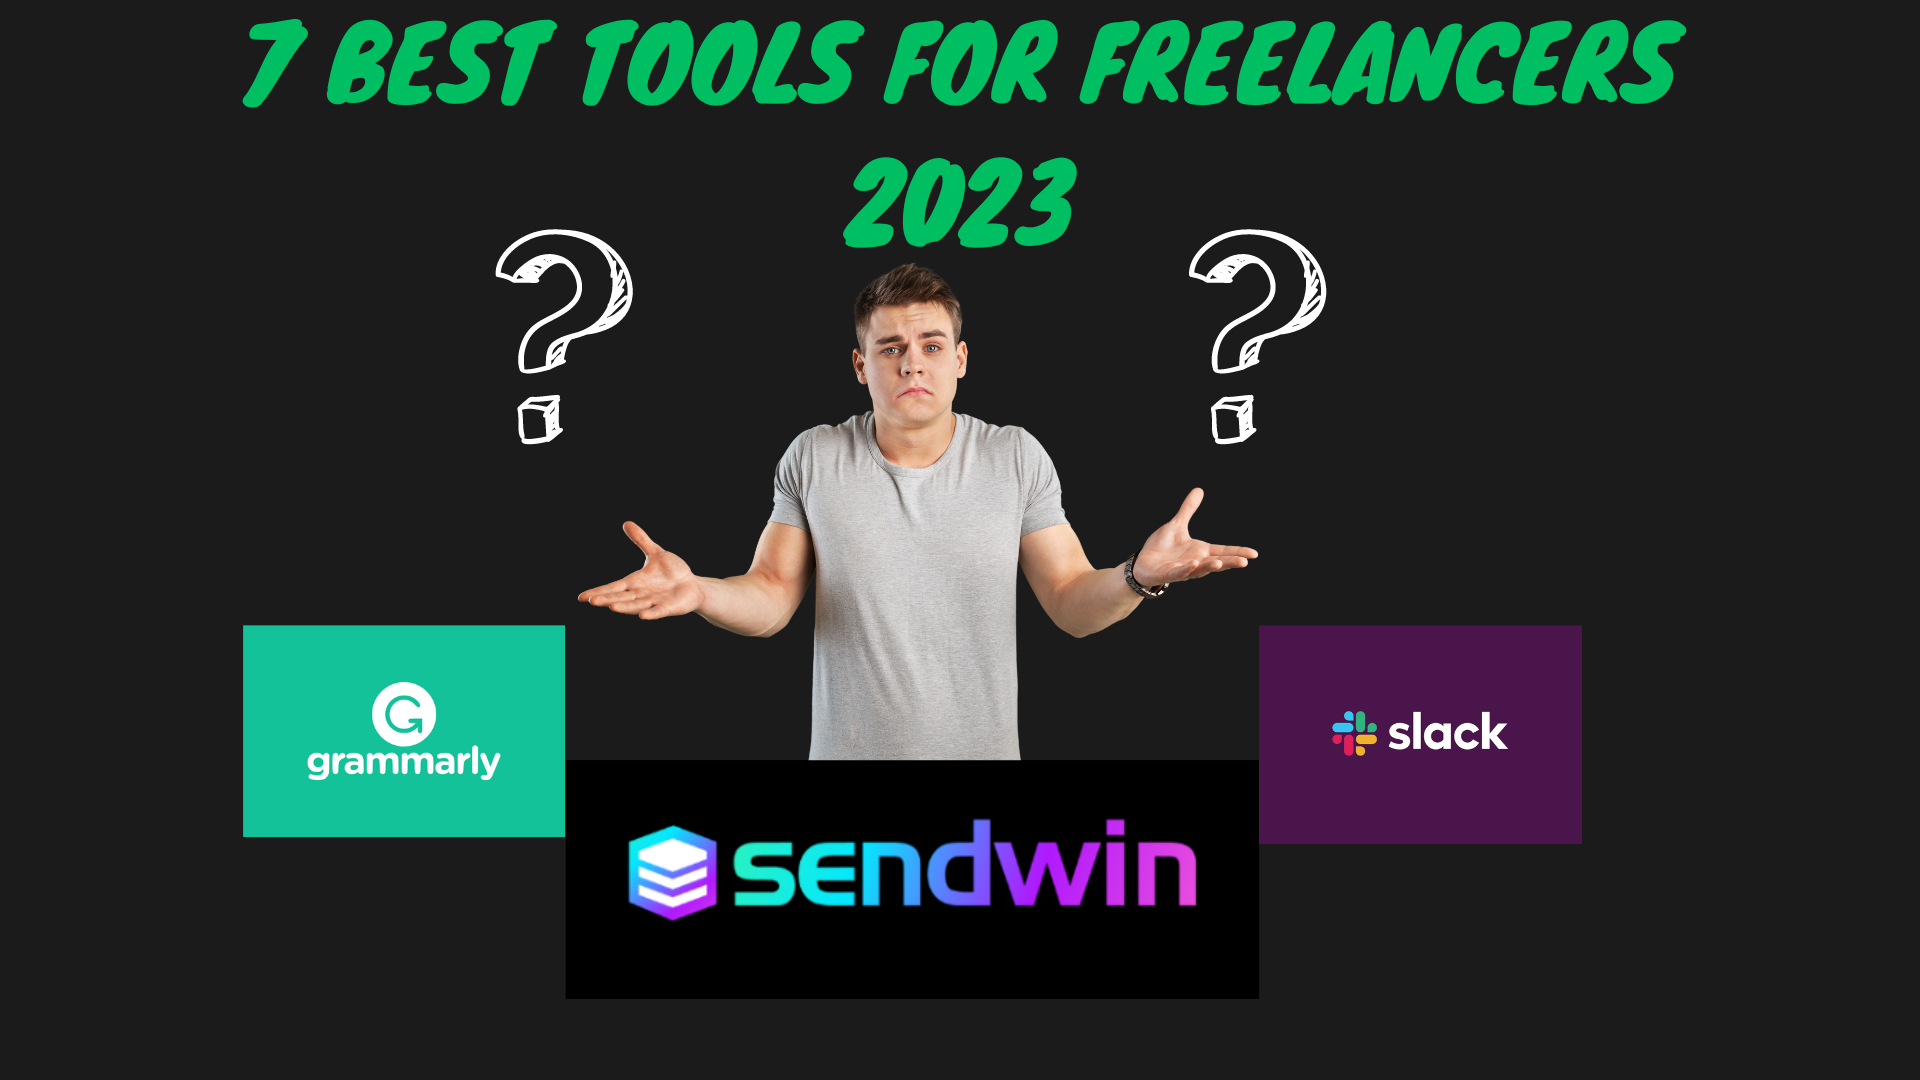 7 Best tools for freelancers 2023